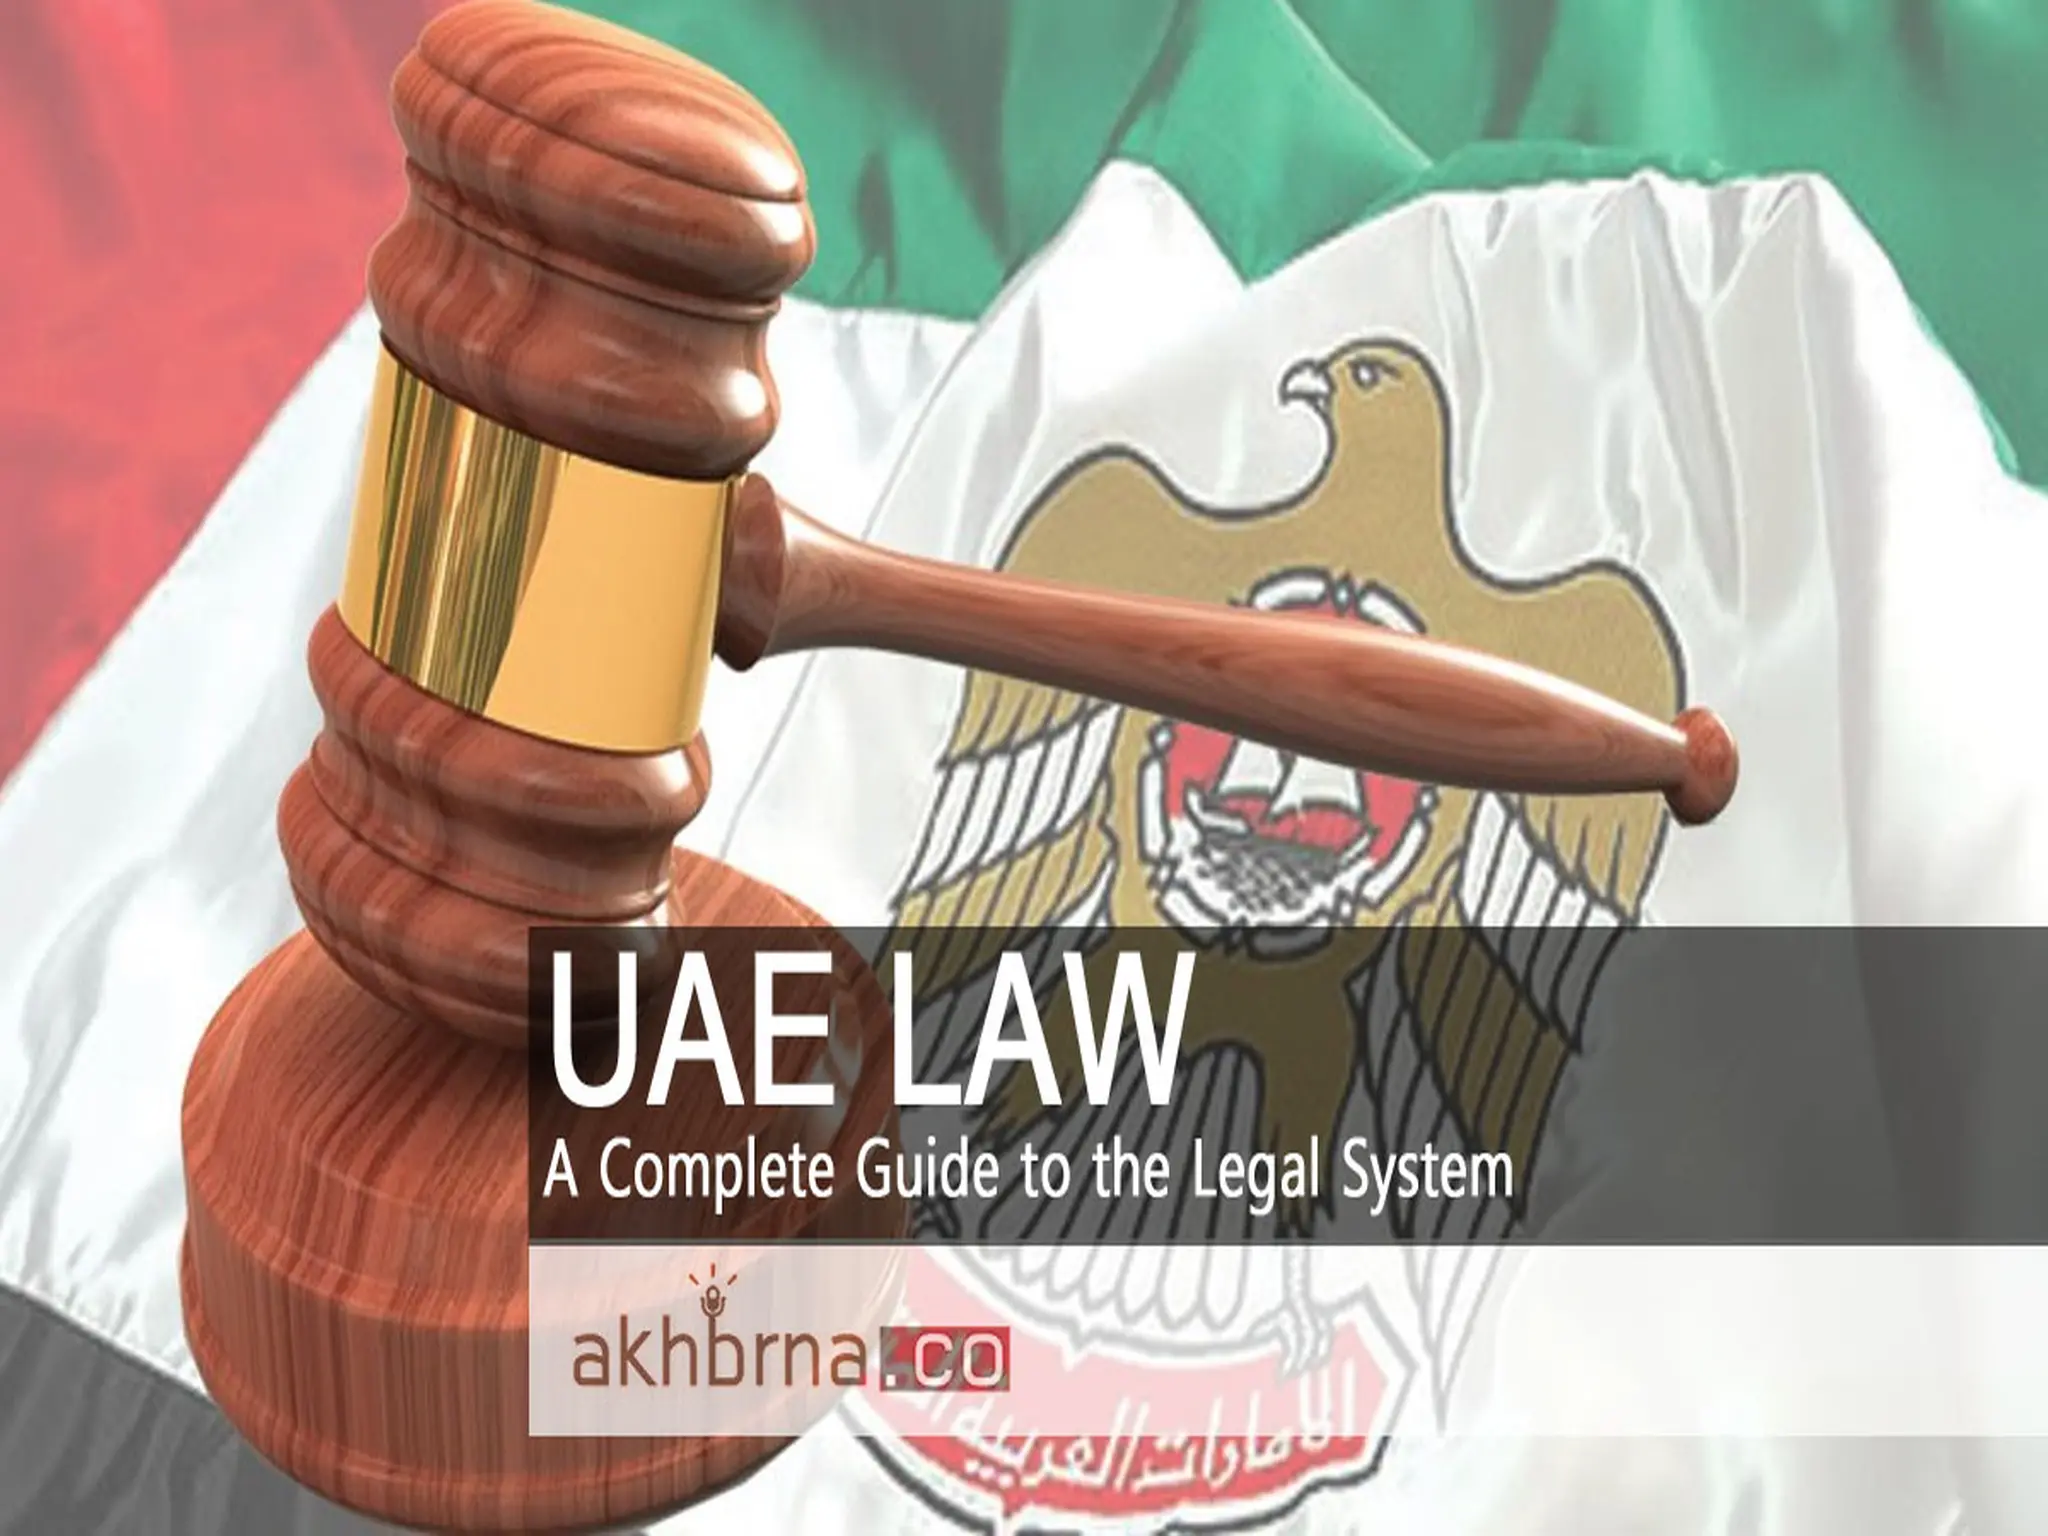 UAE LAW: A Complete Guide to the Legal System 